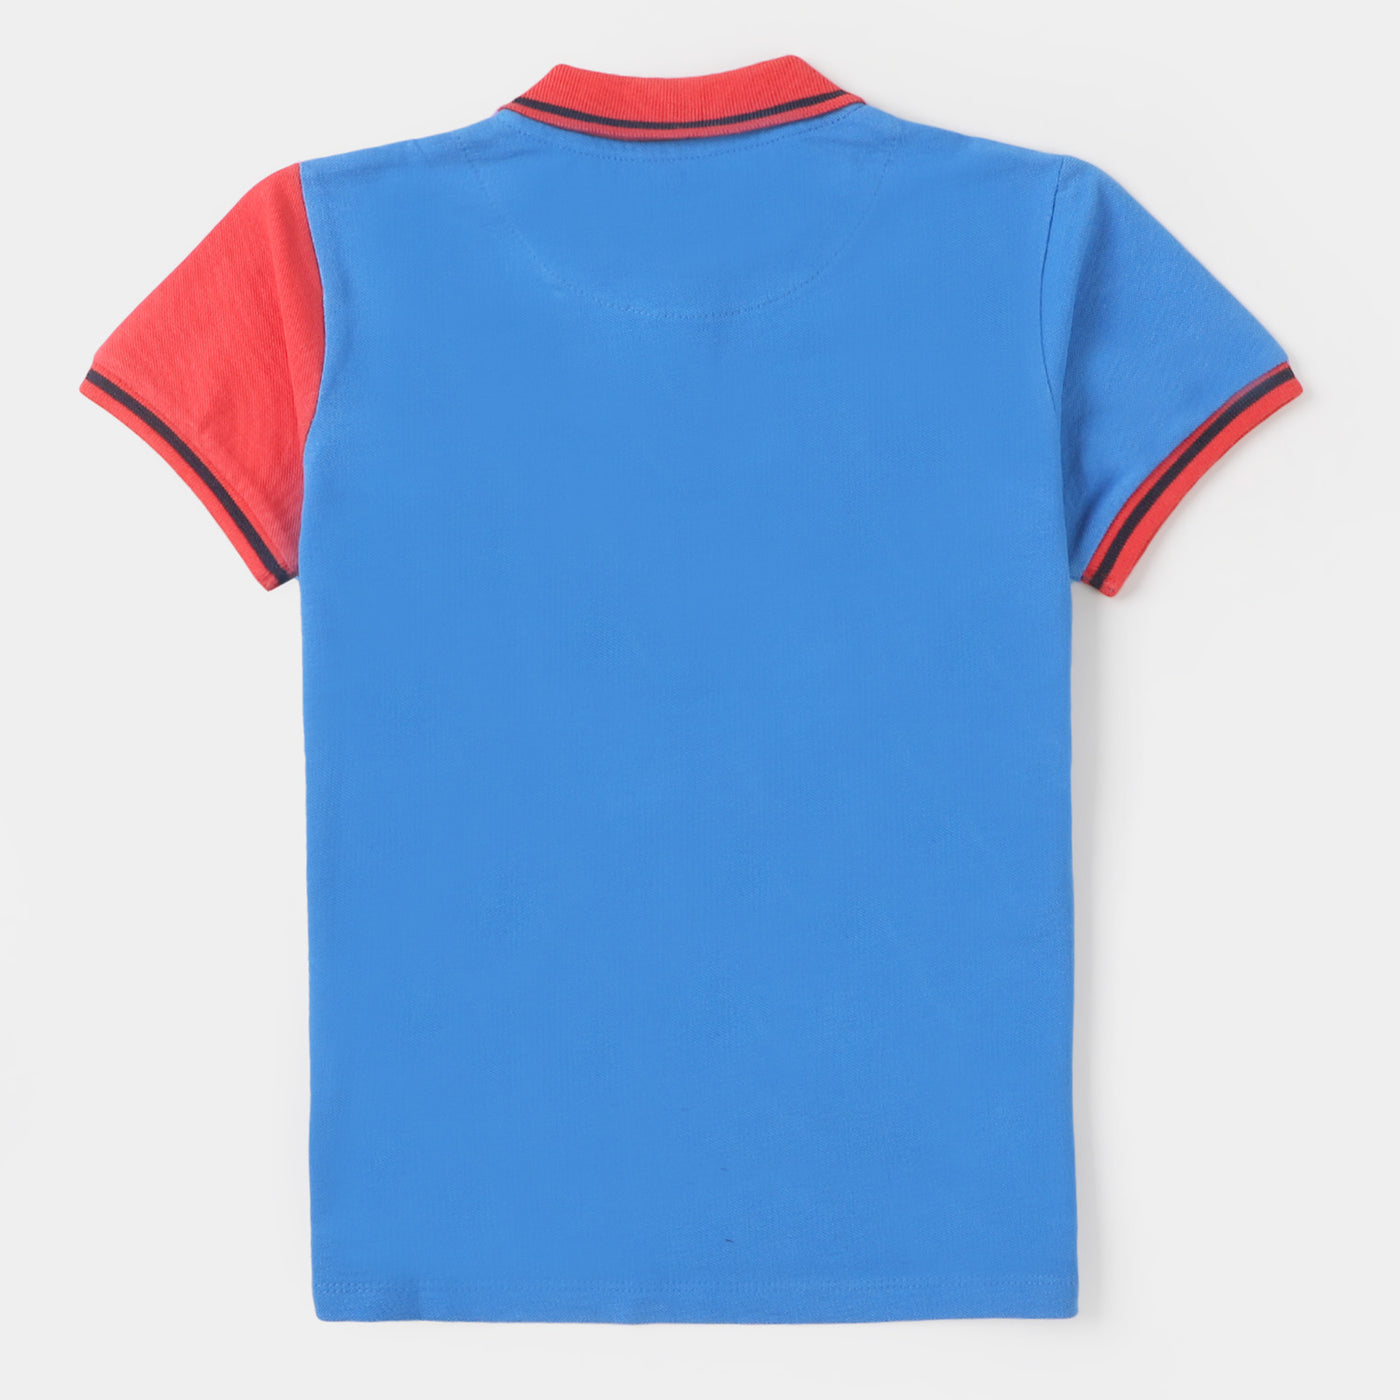 Boys Polo T-Shirt Character - Red and Blue